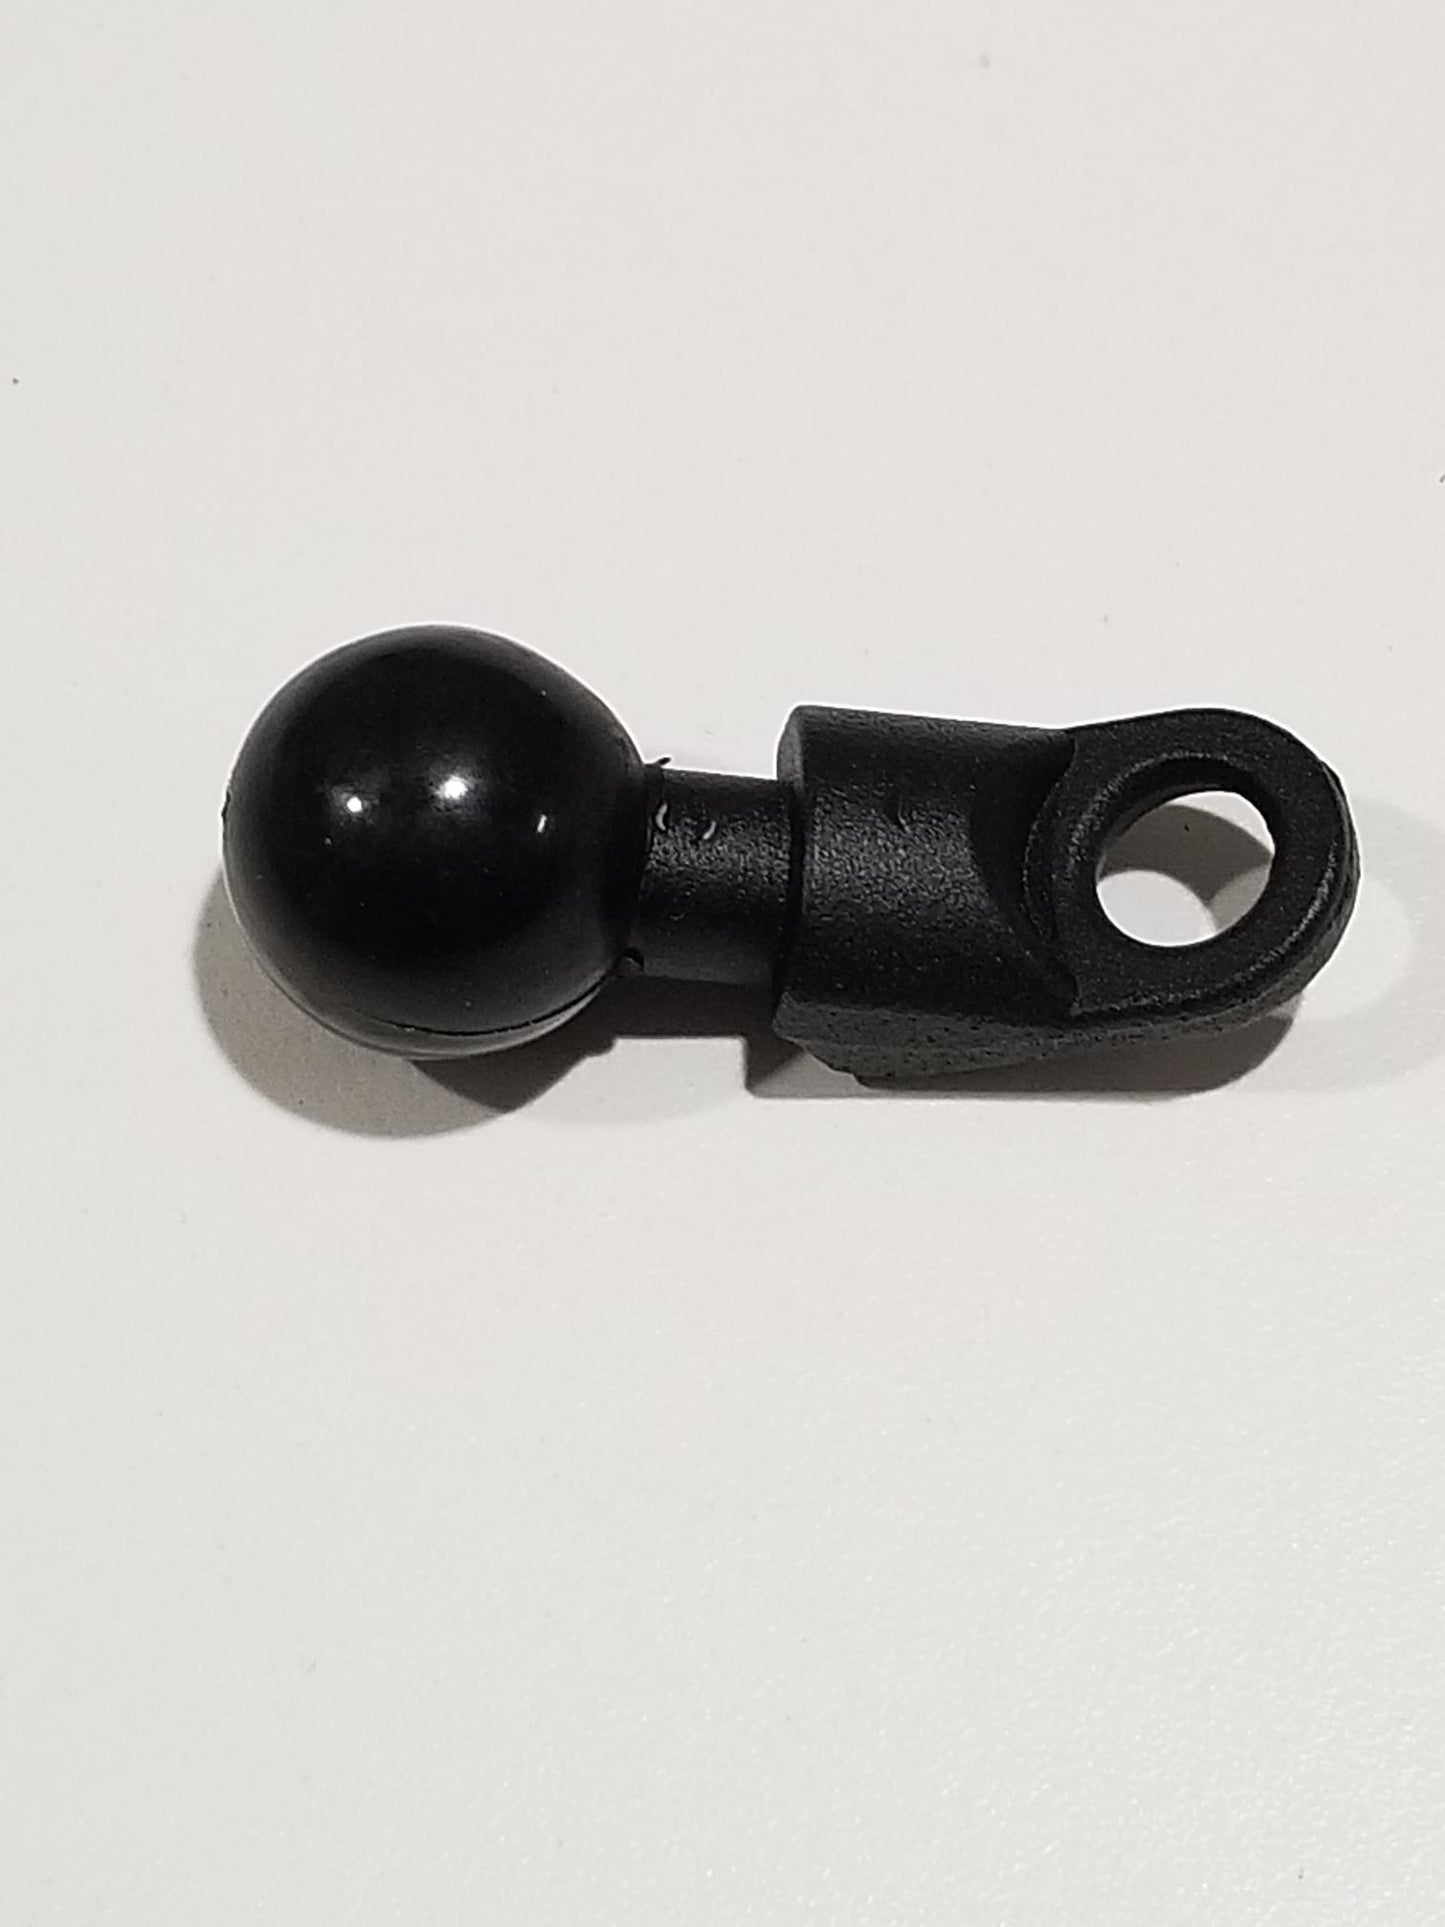 Mirror or Stem Mounting Bracket with 15/16" ball for Phone Mounts with Articulating Ball RidePower